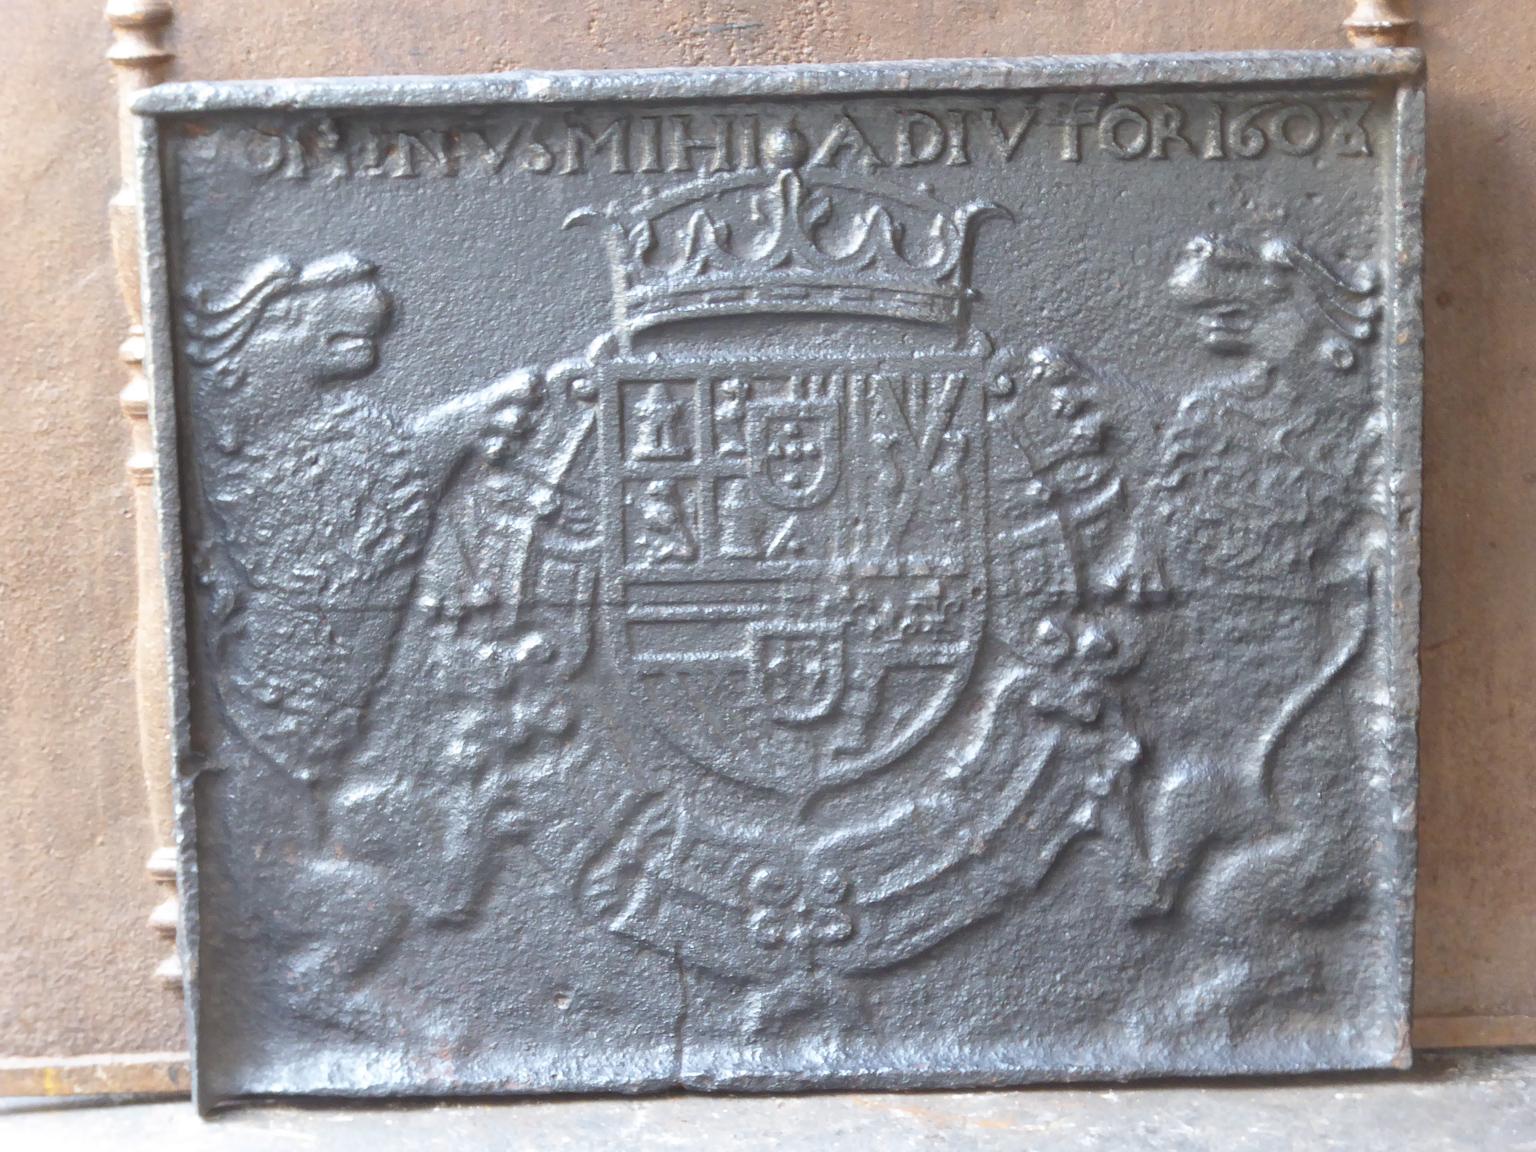 16th-17th century fireback with the coat of arms of Philip III of Spain. The fireback is made of cast iron and has a natural brown patina. Upon request it can be made black / pewter.